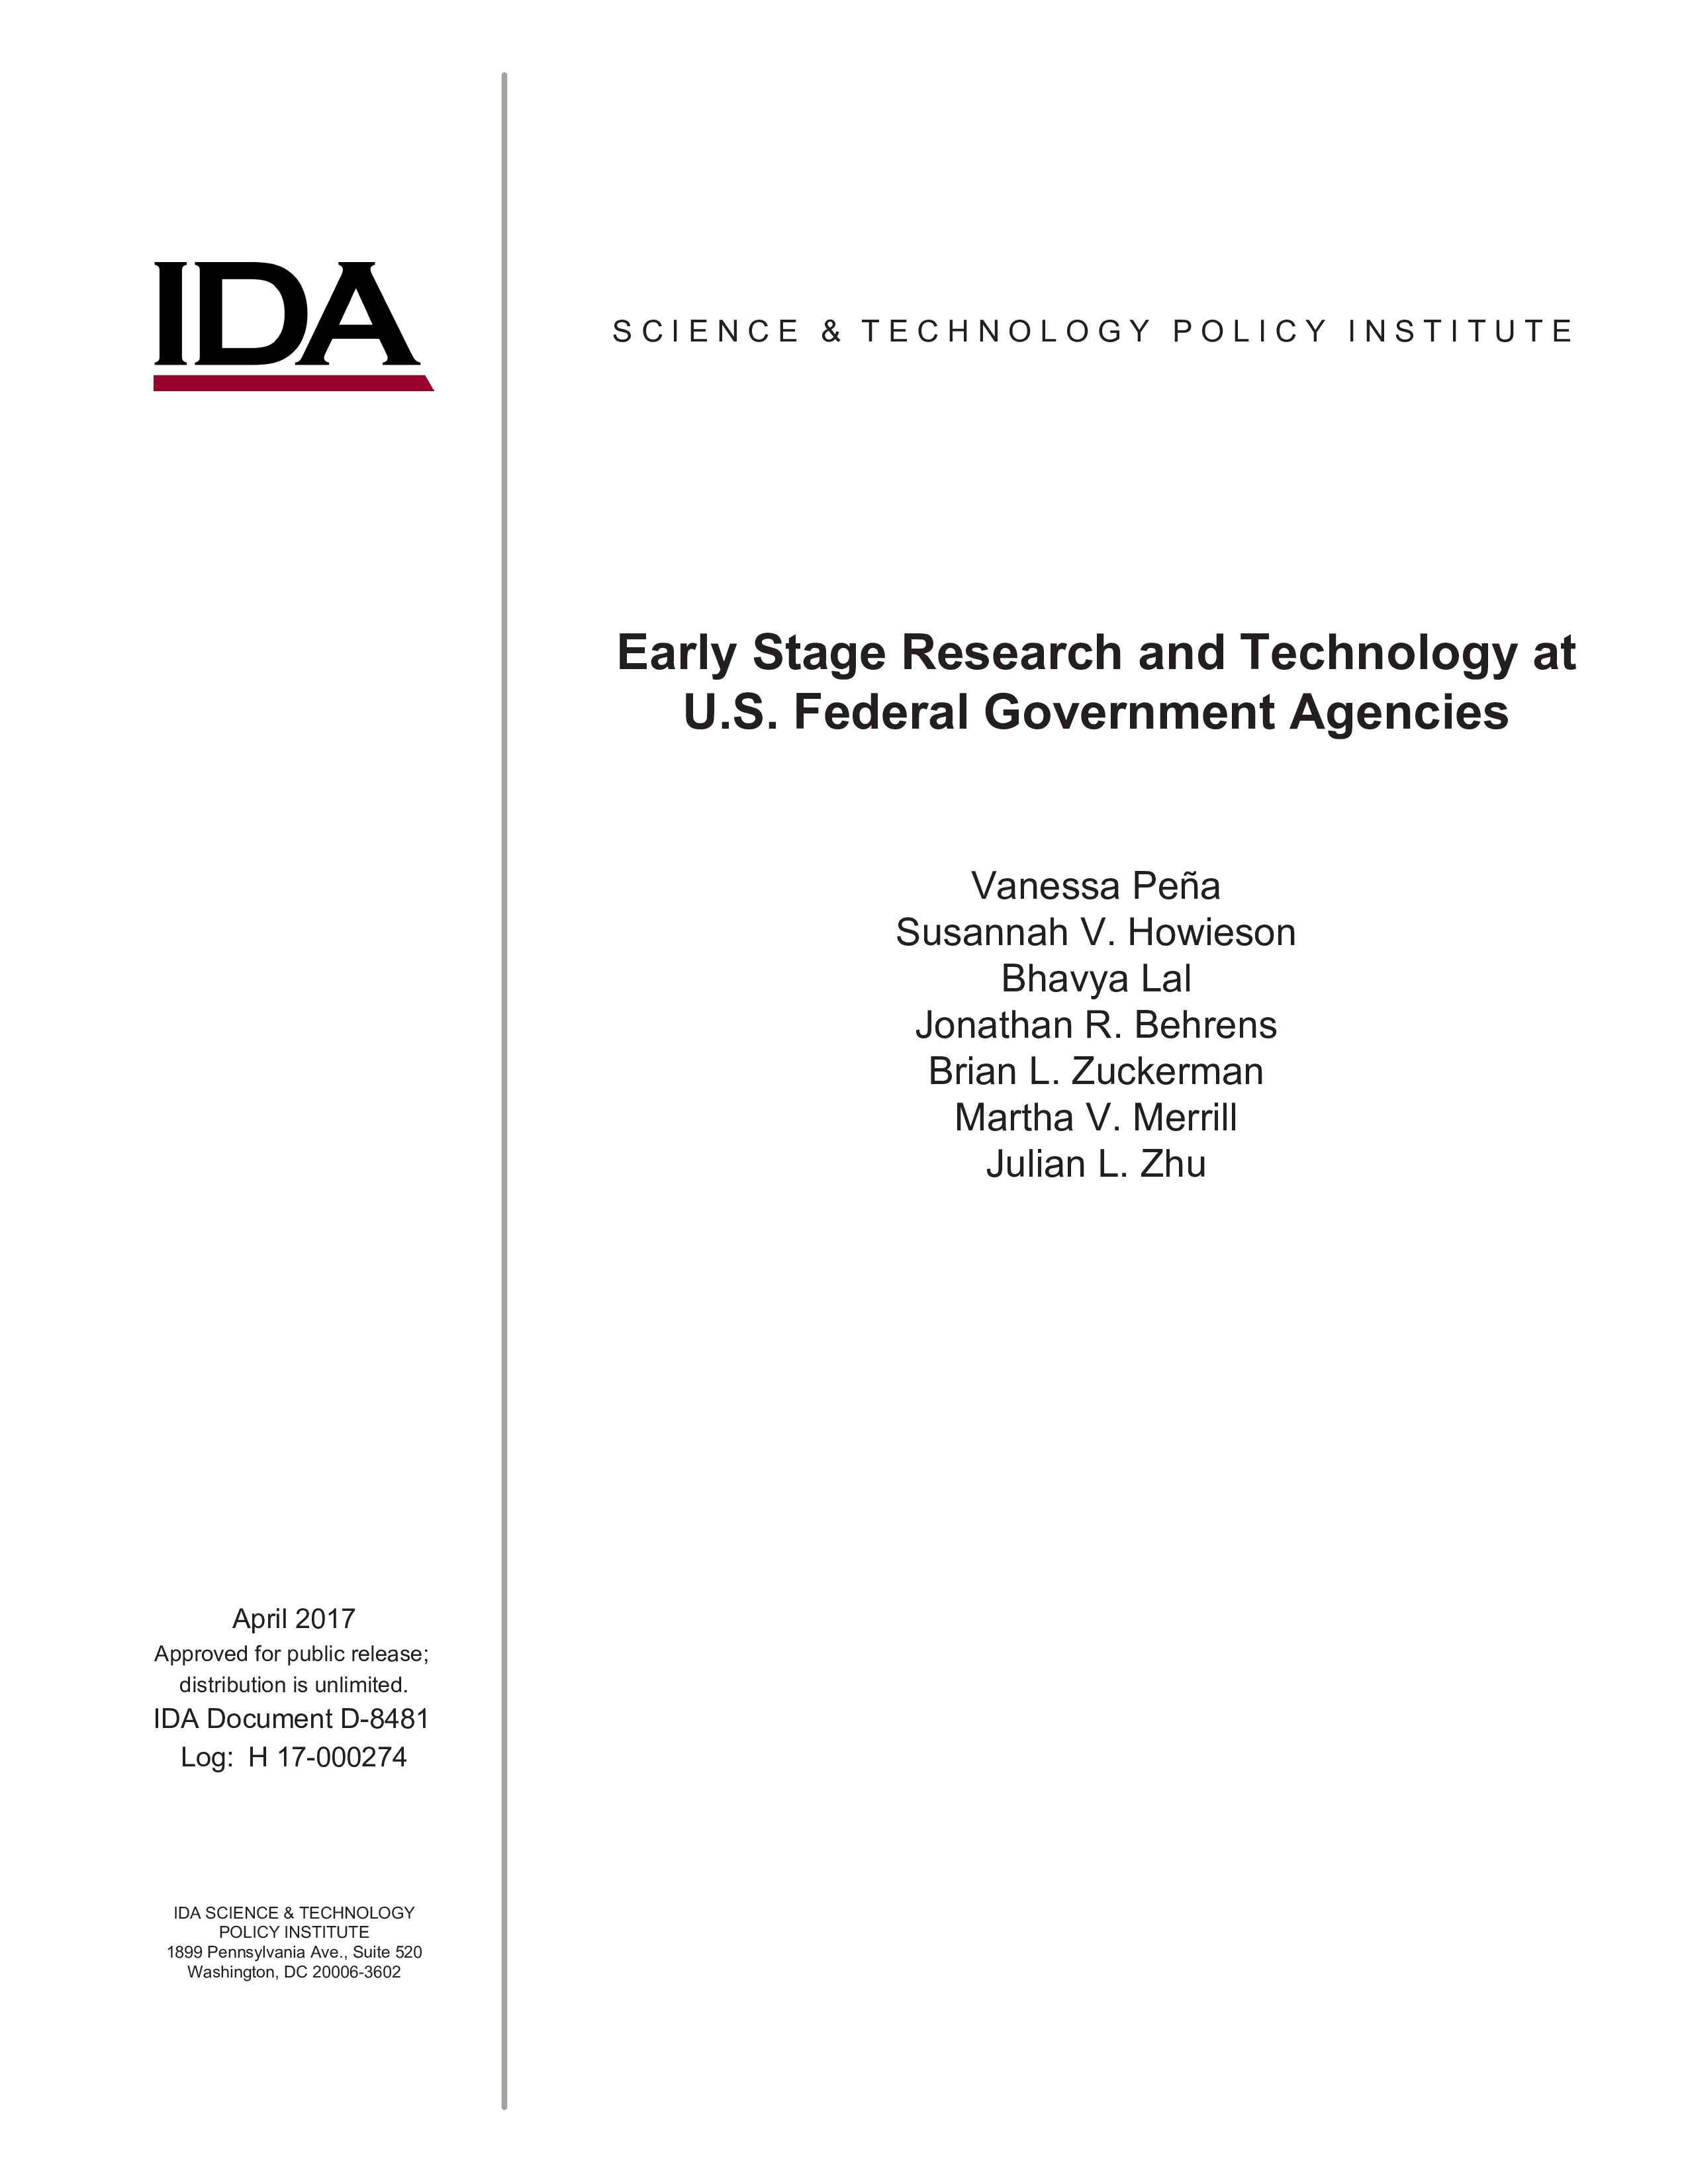 Early Stage Research and Technology at U.S. Federal Government Agencies